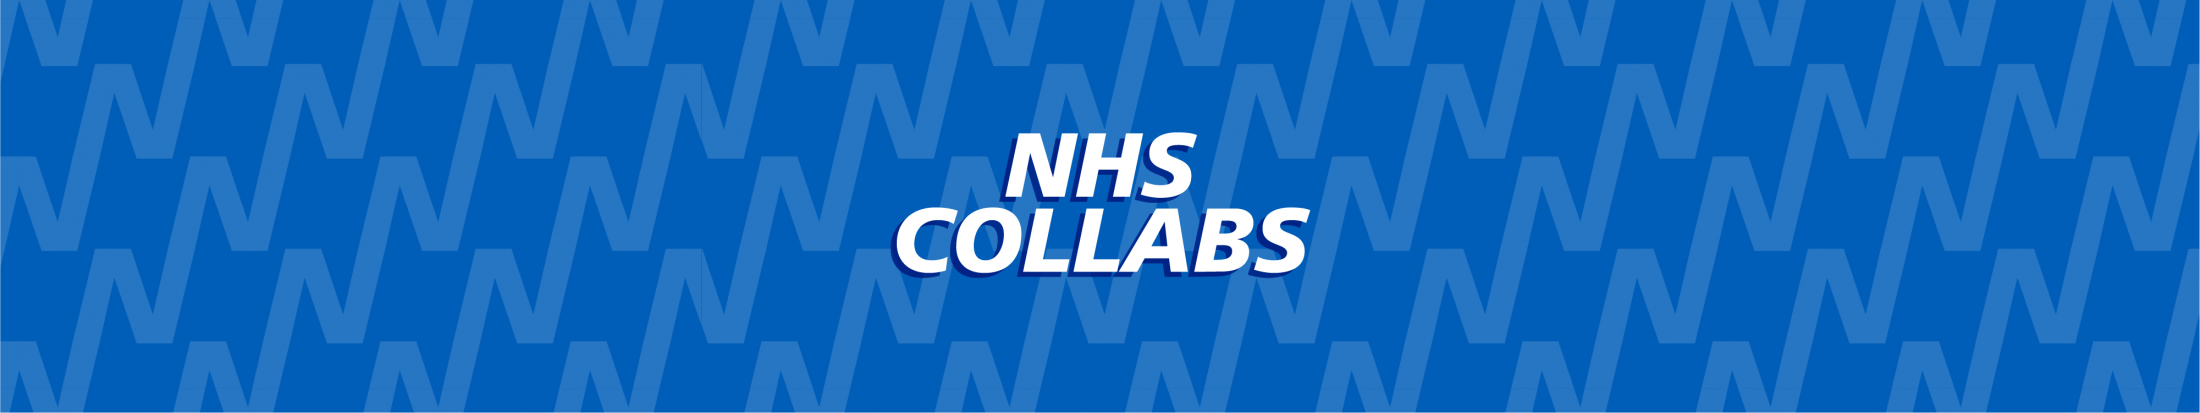 NHS Collaborations